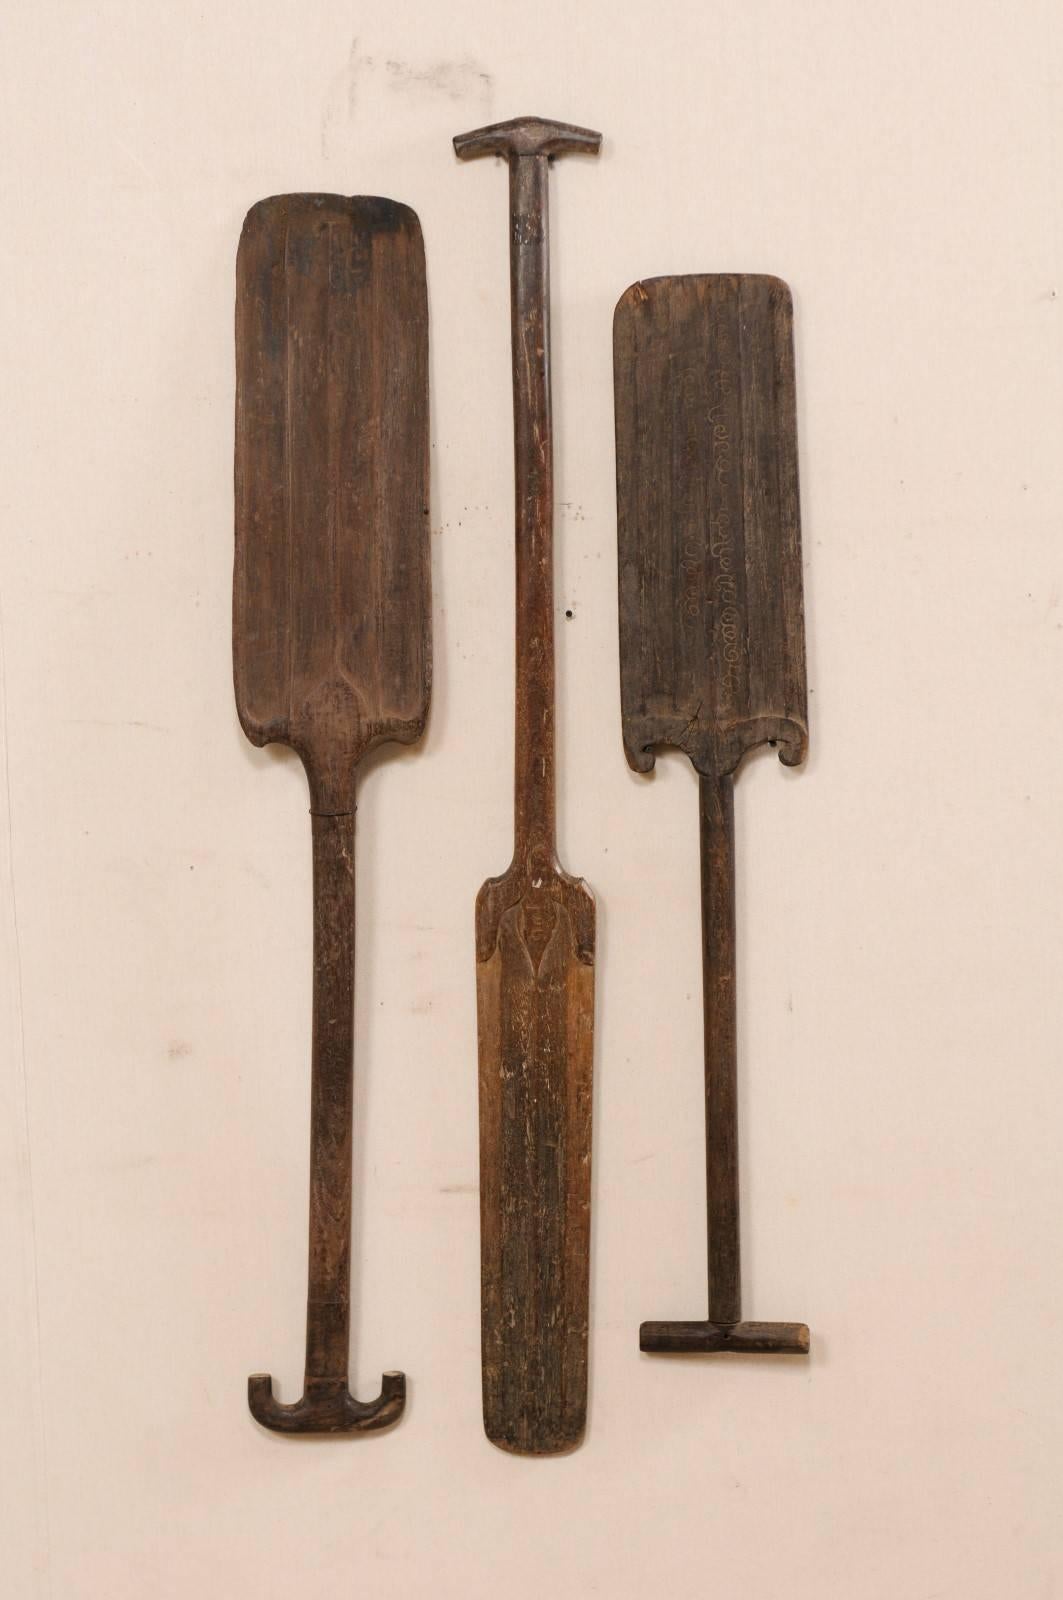 A collection of three South Indian (Kerala) wooden boat paddles from the mid-20th century. This collection of hand-carved boat oars from Kerala are each adorn with decoratively carved accents at the top of the blade, and slightly differing carved